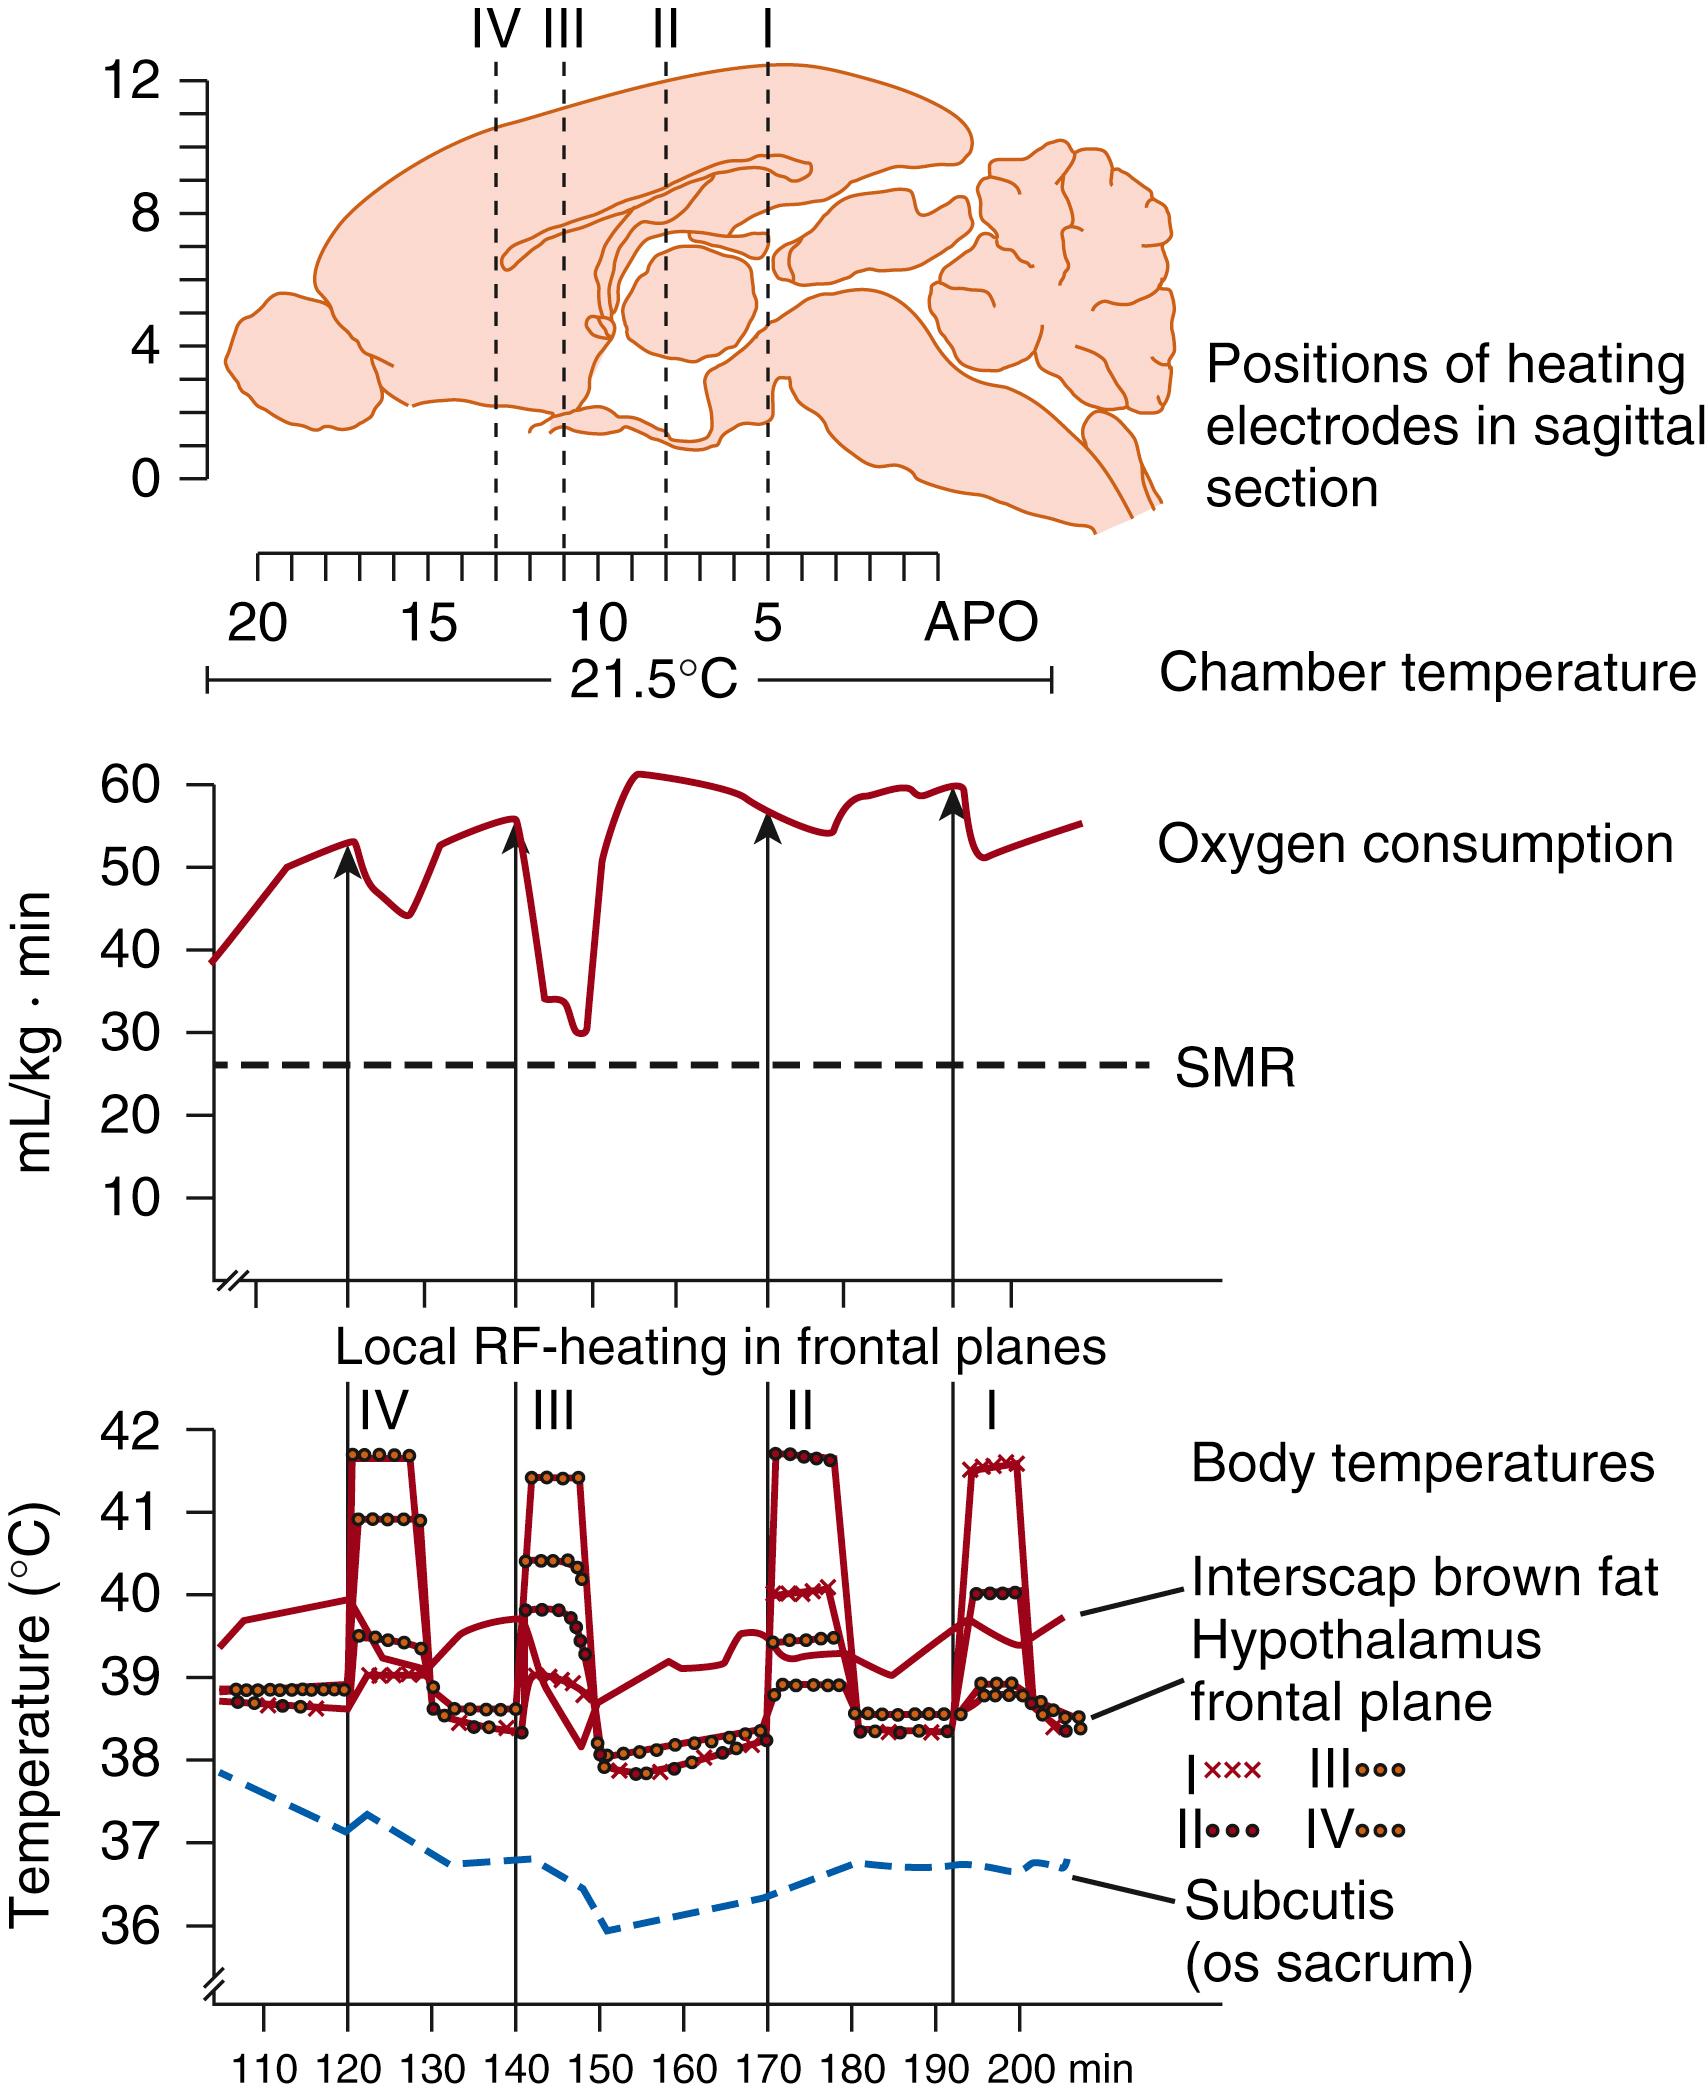 Fig. 42.5, Effect of local radio frequency (RF) heating in different frontal planes of the hypothalamus on nonshivering thermogenesis (NST) induced by external cooling in a newborn guinea pig (for these small animals, an ambient temperature of 21.5°C is below neutral temperature). The upper part of the figure shows the projection of the four implanted electrodes on the sagittal section of the brain. The different frontal planes were locally heated in succession. Only heating of plane III, corresponding to the preoptic area and anterior hypothalamus, resulted in an almost complete suppression of the cold-induced NST (note reduction of the temperature within the interscapular brown fat). APO, Apomorphine; SMR, oxygen uptake corresponding to standard metabolic rate.